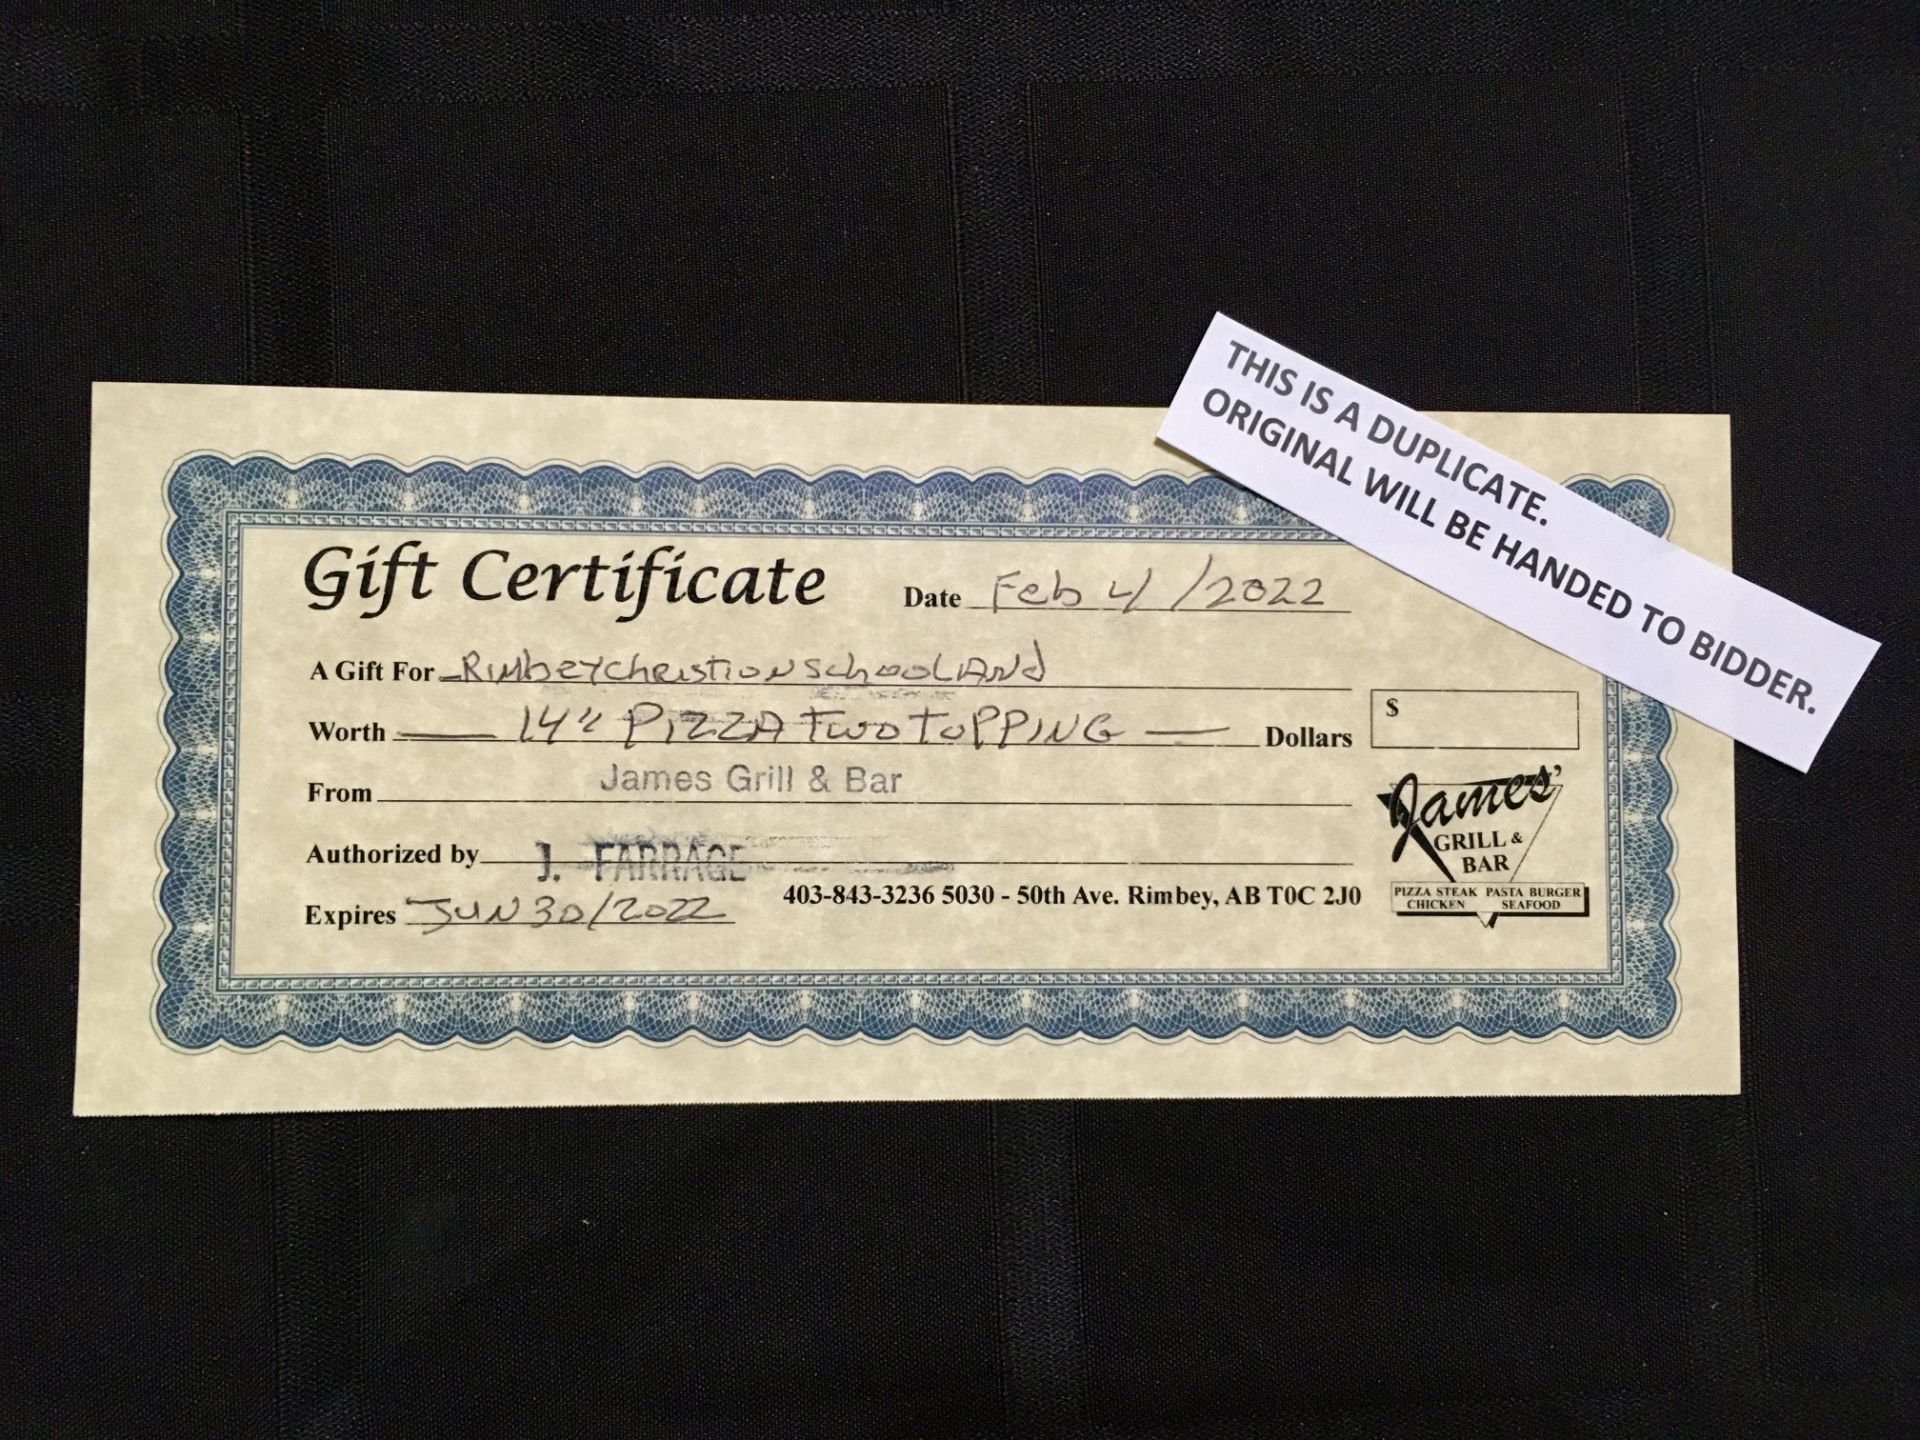 JAMES GRILL & BAR GIFT CERTIFICATE: 14" PIZZA with 2 TOPPINGS